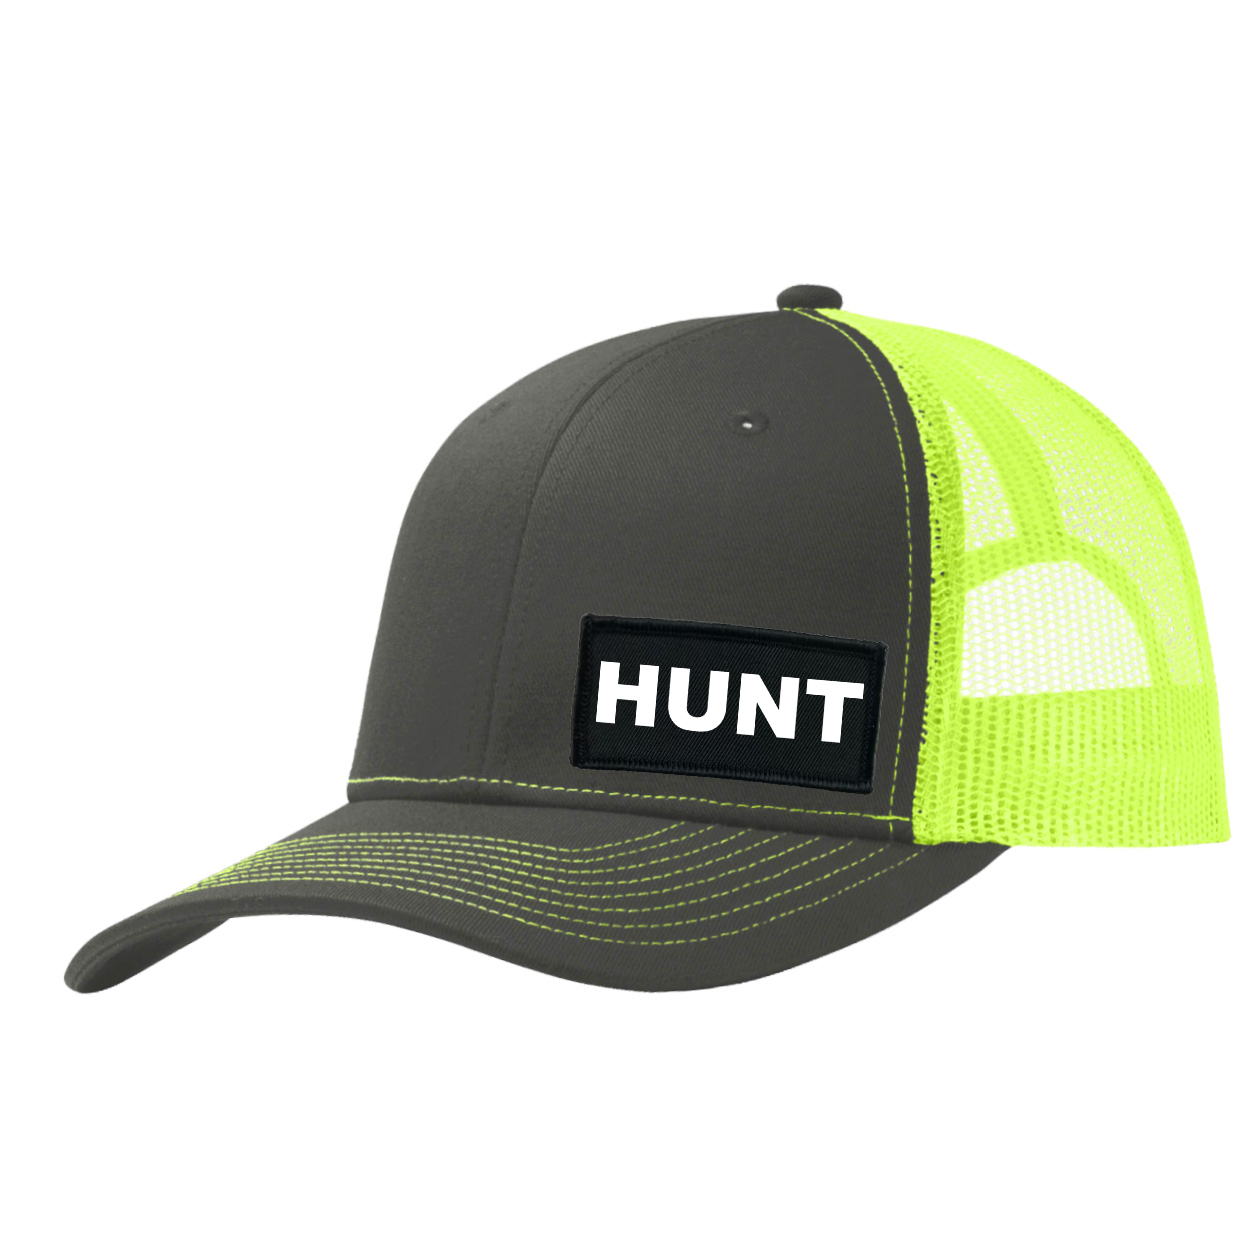 Hunt Brand Logo Night Out Woven Patch Snapback Trucker Hat Charcoal/Neon Yellow (White Logo)